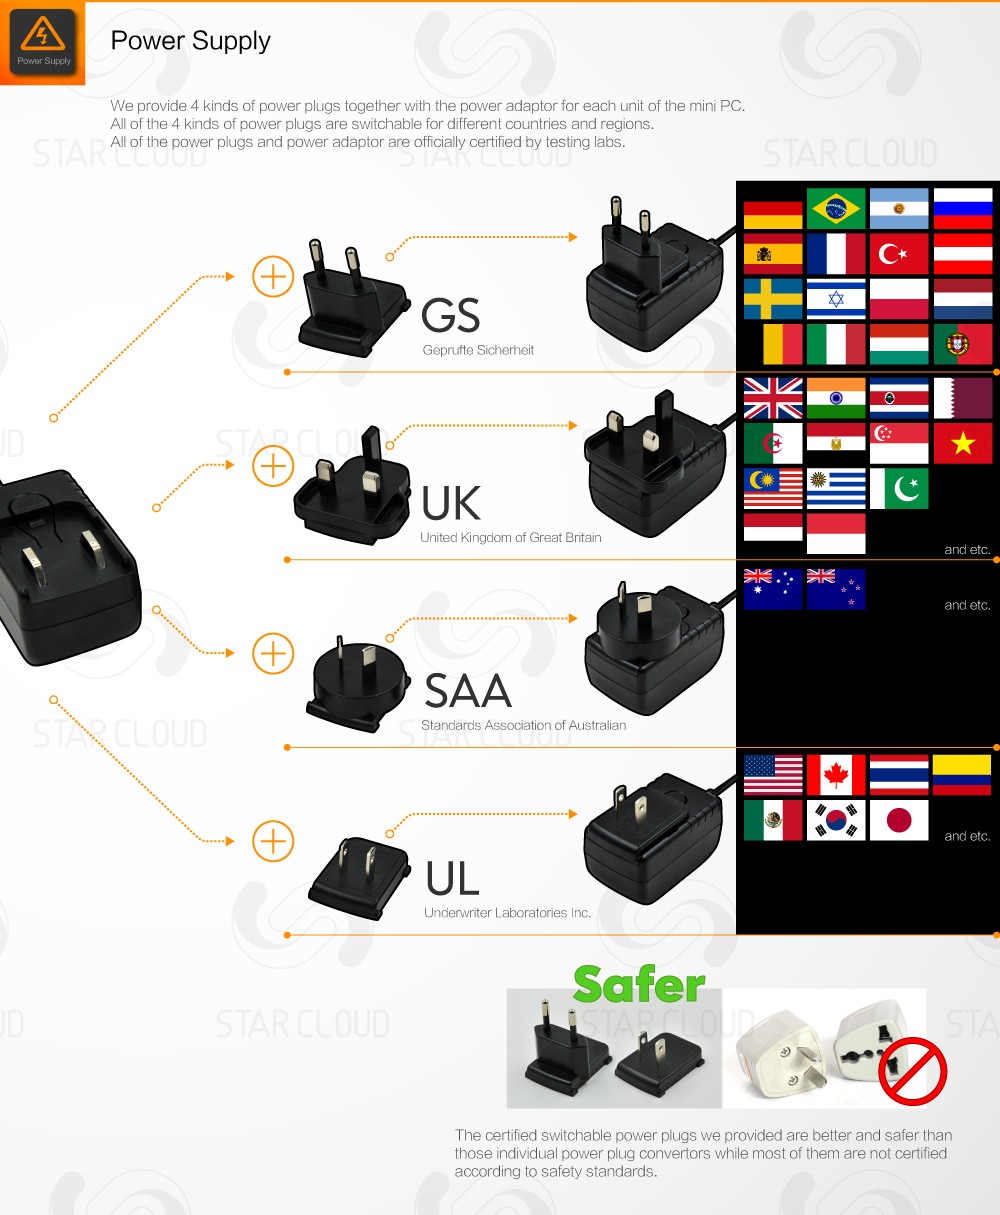 Power Supply We provide 4 kinds of power plugs together with the power adaptor for each unit of the mini PC. All of the 4 kinds of power plugs are switchable for different countries and regions. All of the power plugs and power adaptor are officially certified by testing labs. Geprufte	Sicherheit Safer The certified switchable power plugs we provided are better and safer than those individual power plug convertors while most of them are not certified according to safety standards.